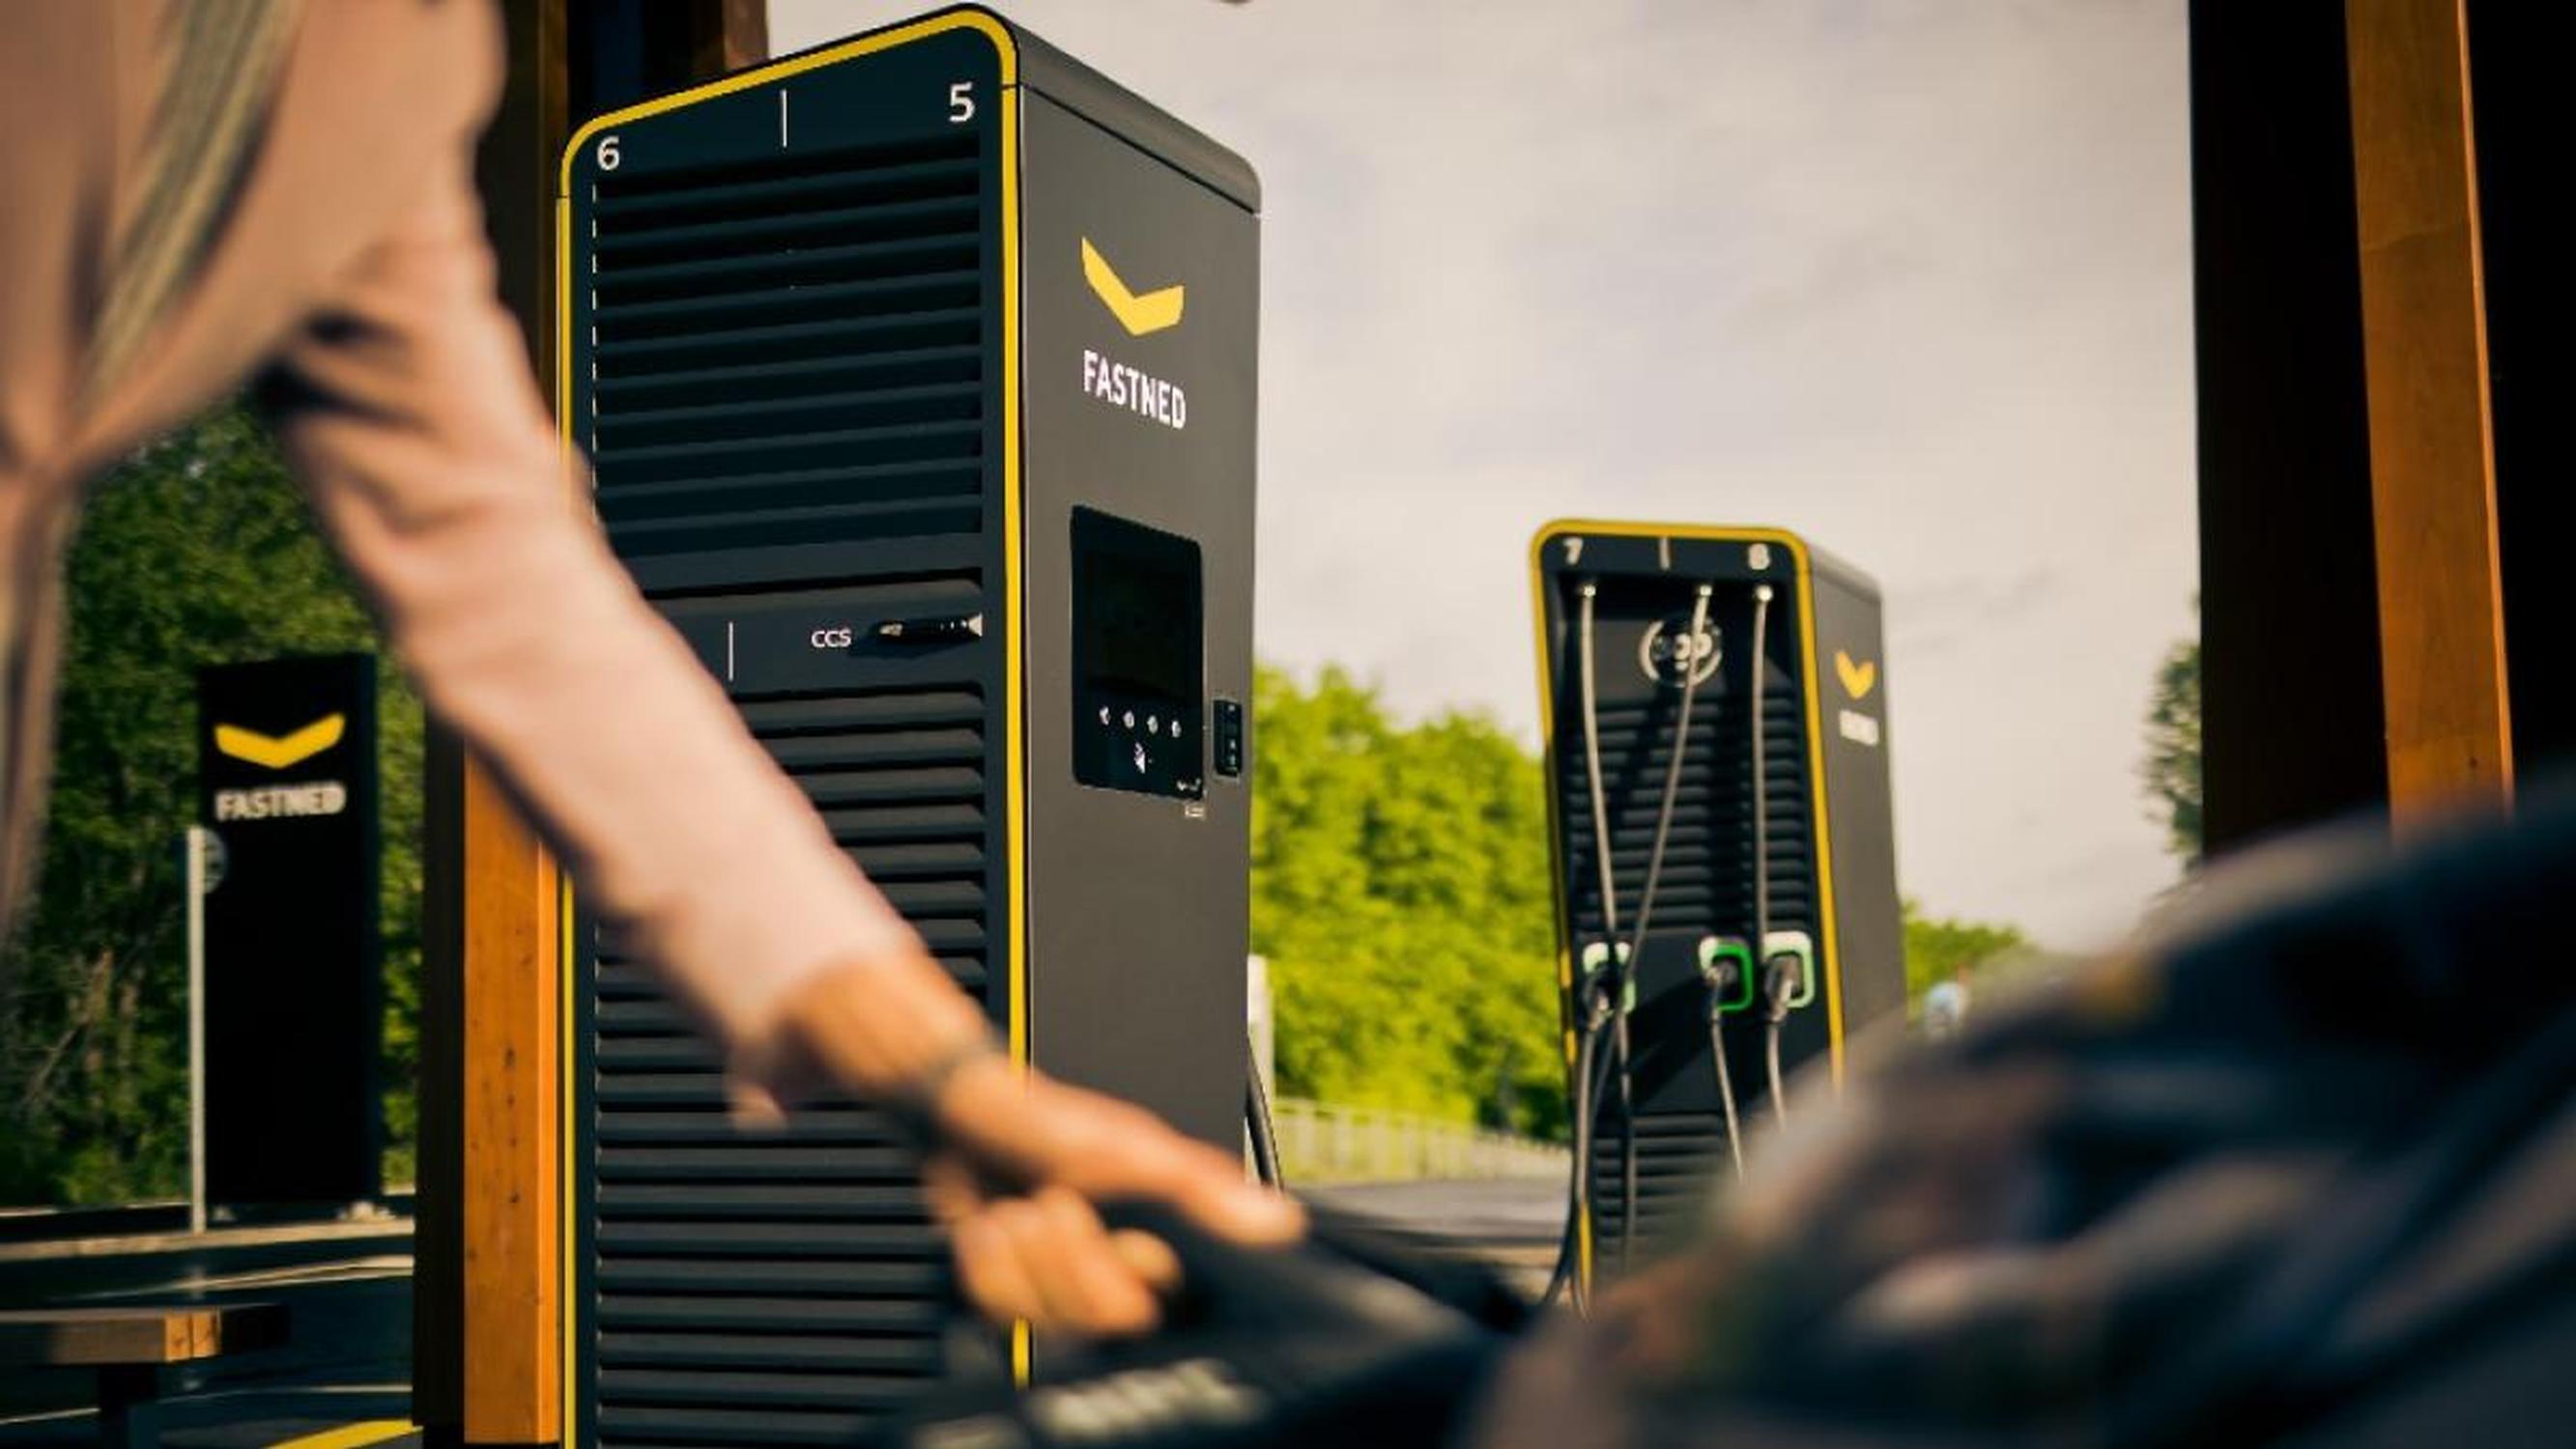 Fastned now has 21 charging hubs in the UK